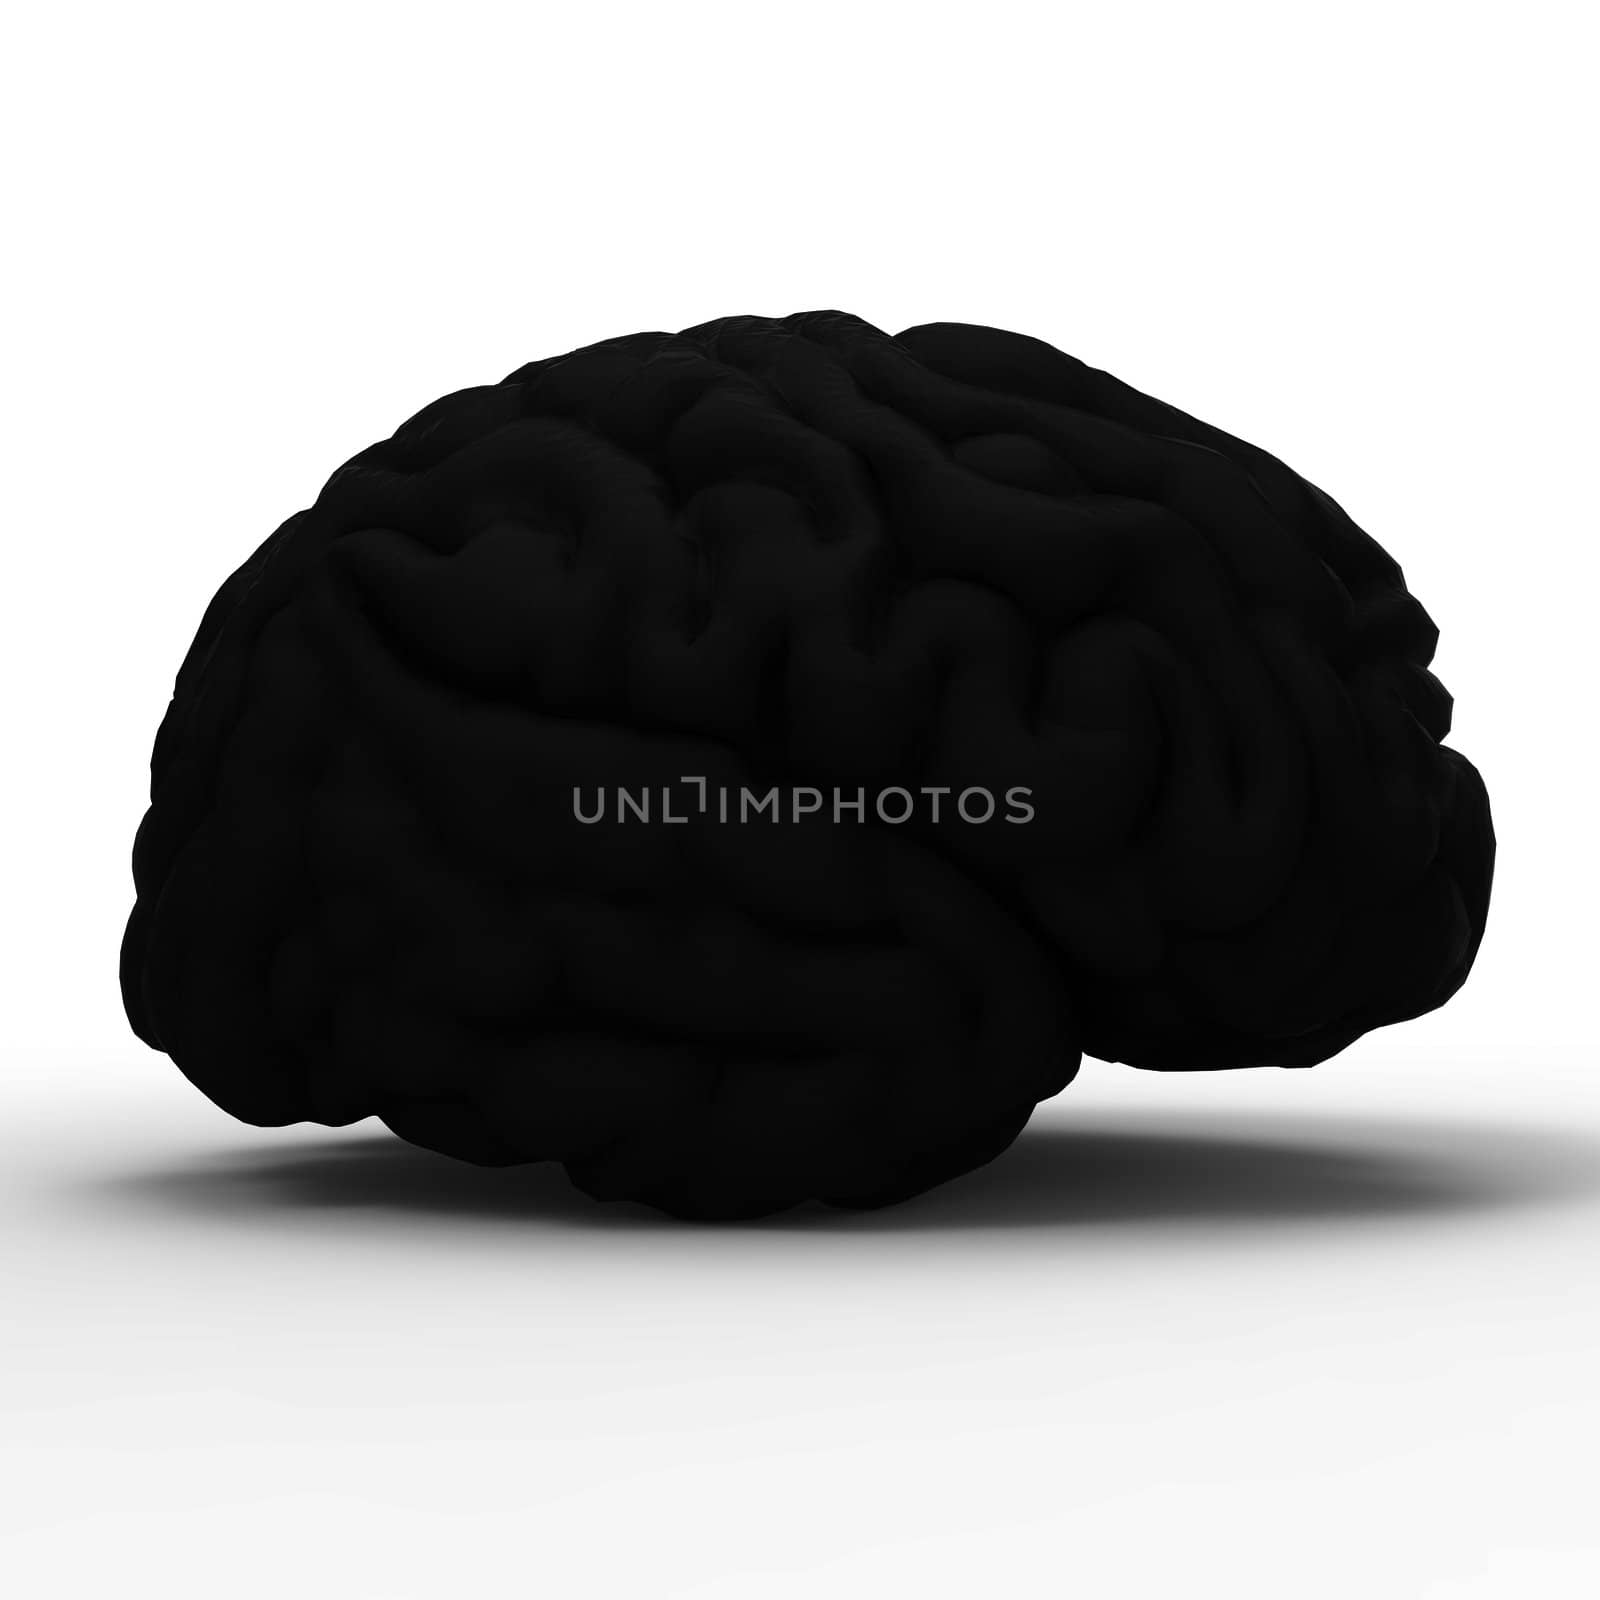 Human brain 3D model, isolated by totuss